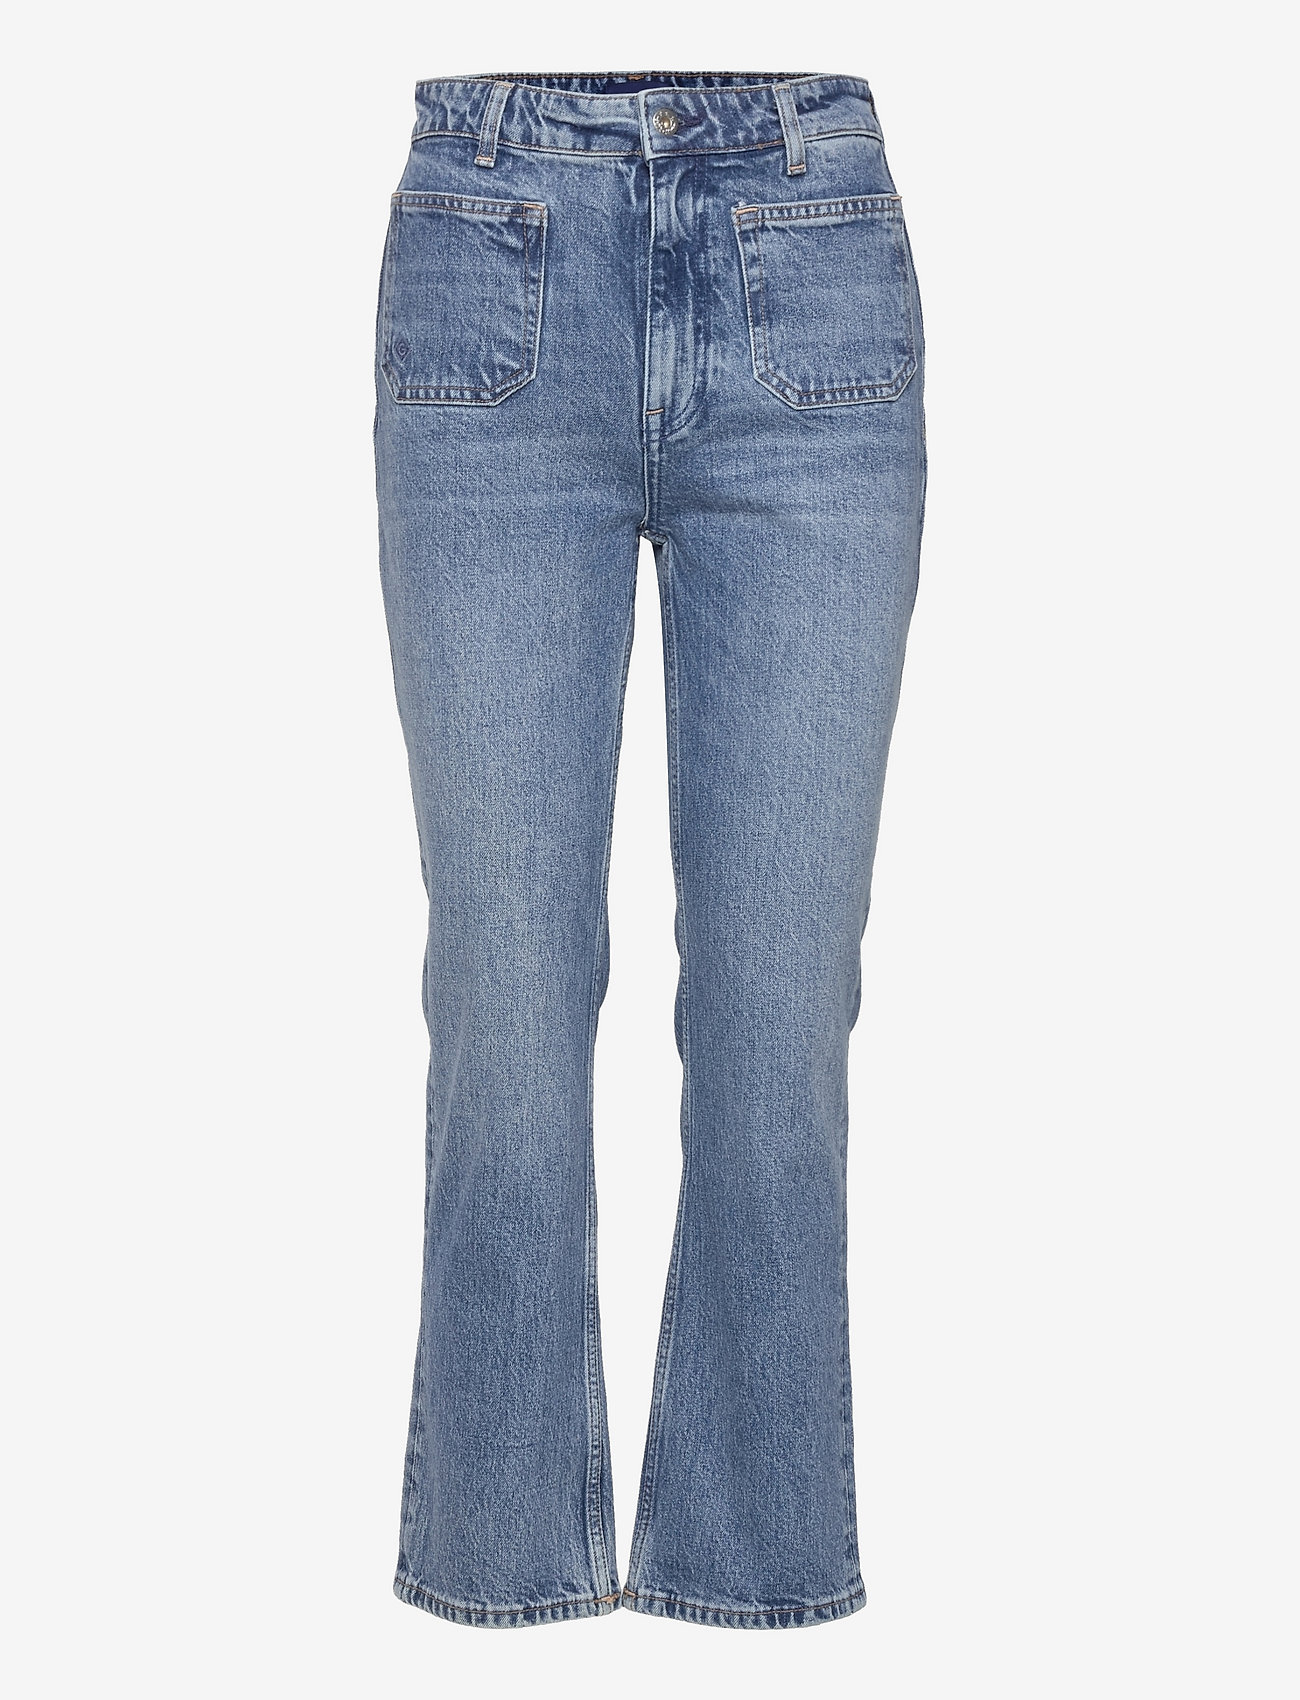 GANT - D1. CROPPED FLARE JEANS - flared jeans - mid blue broken in - 0